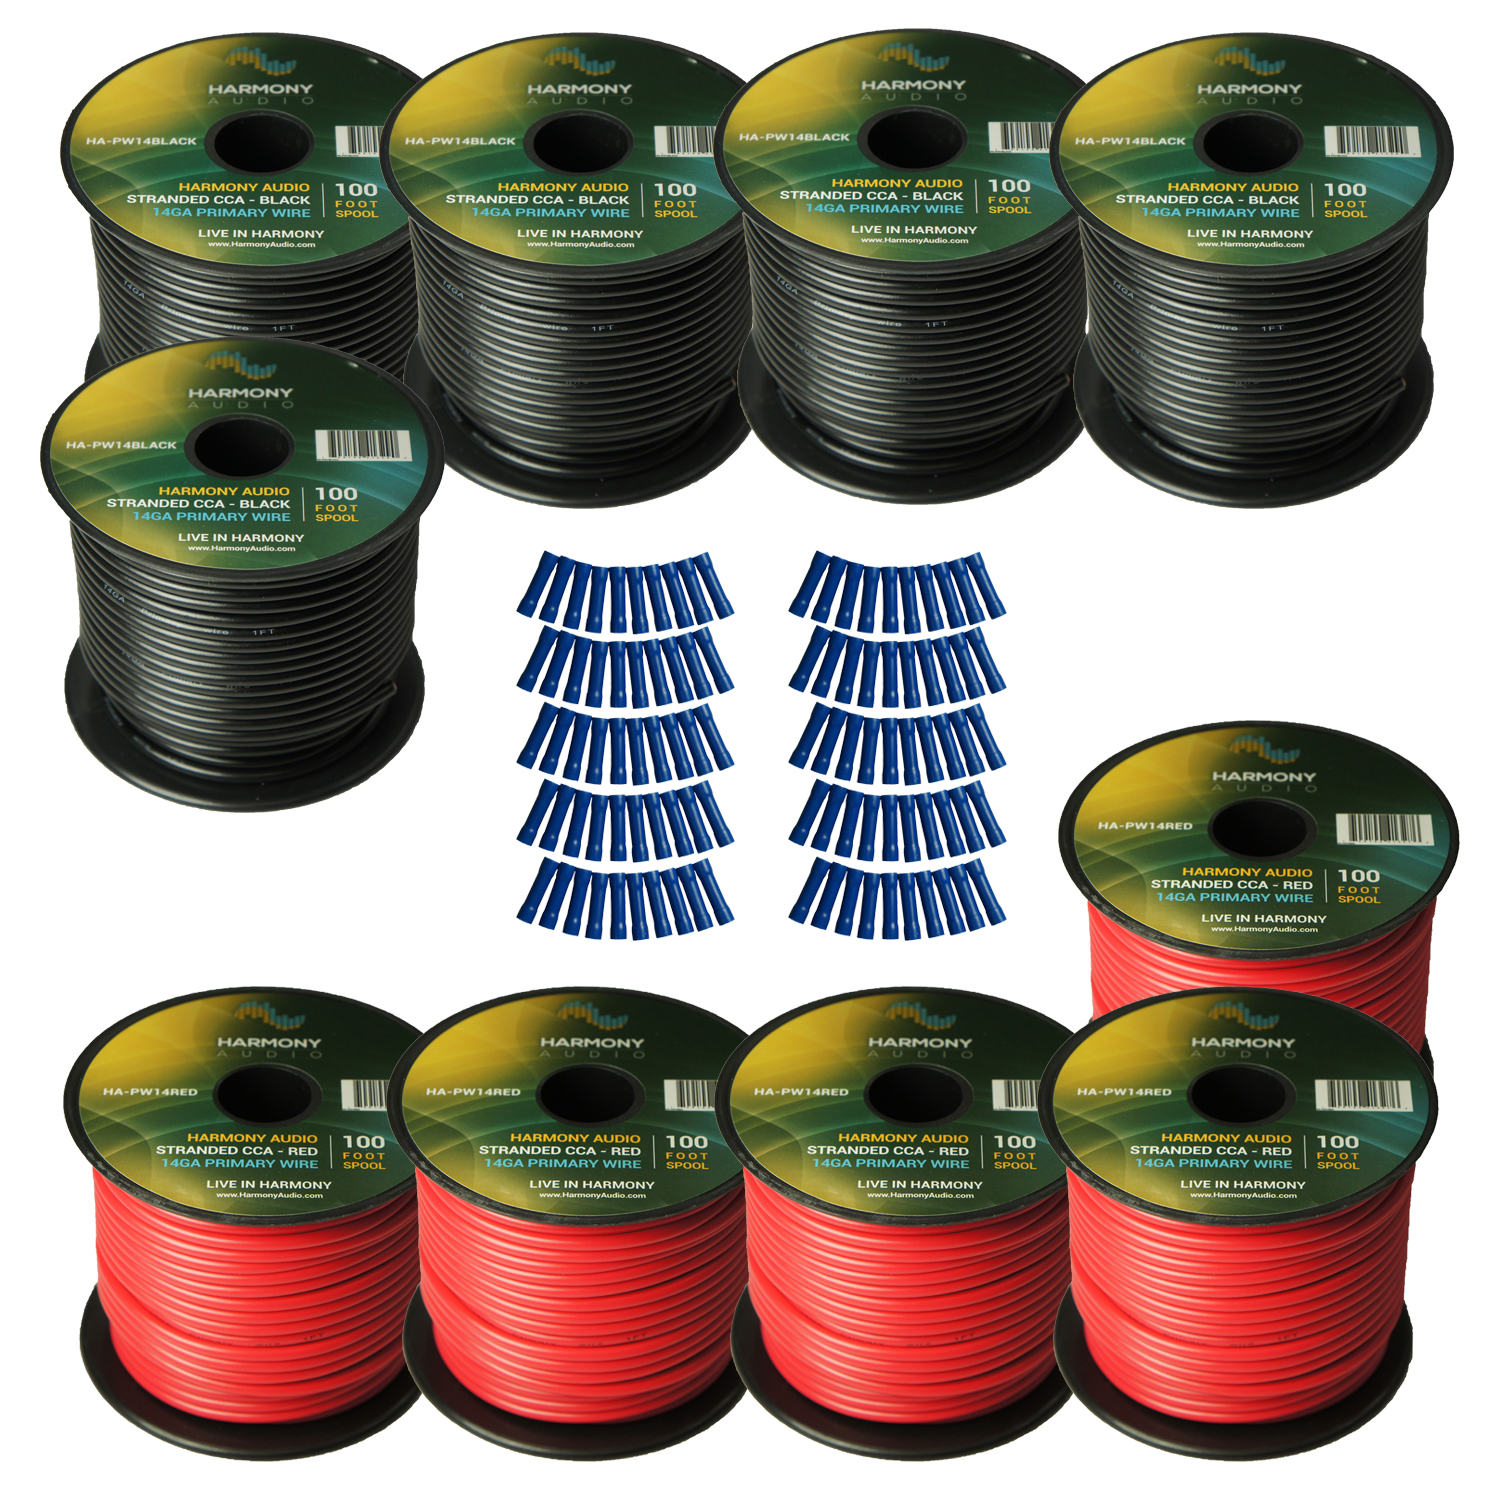 Harmony Audio Primary Single Conductor 14 Gauge Power or Ground Wire - 10 Rolls - 1000 Feet - Red & Black for Car Audio / Trailer / Model Train / Remote